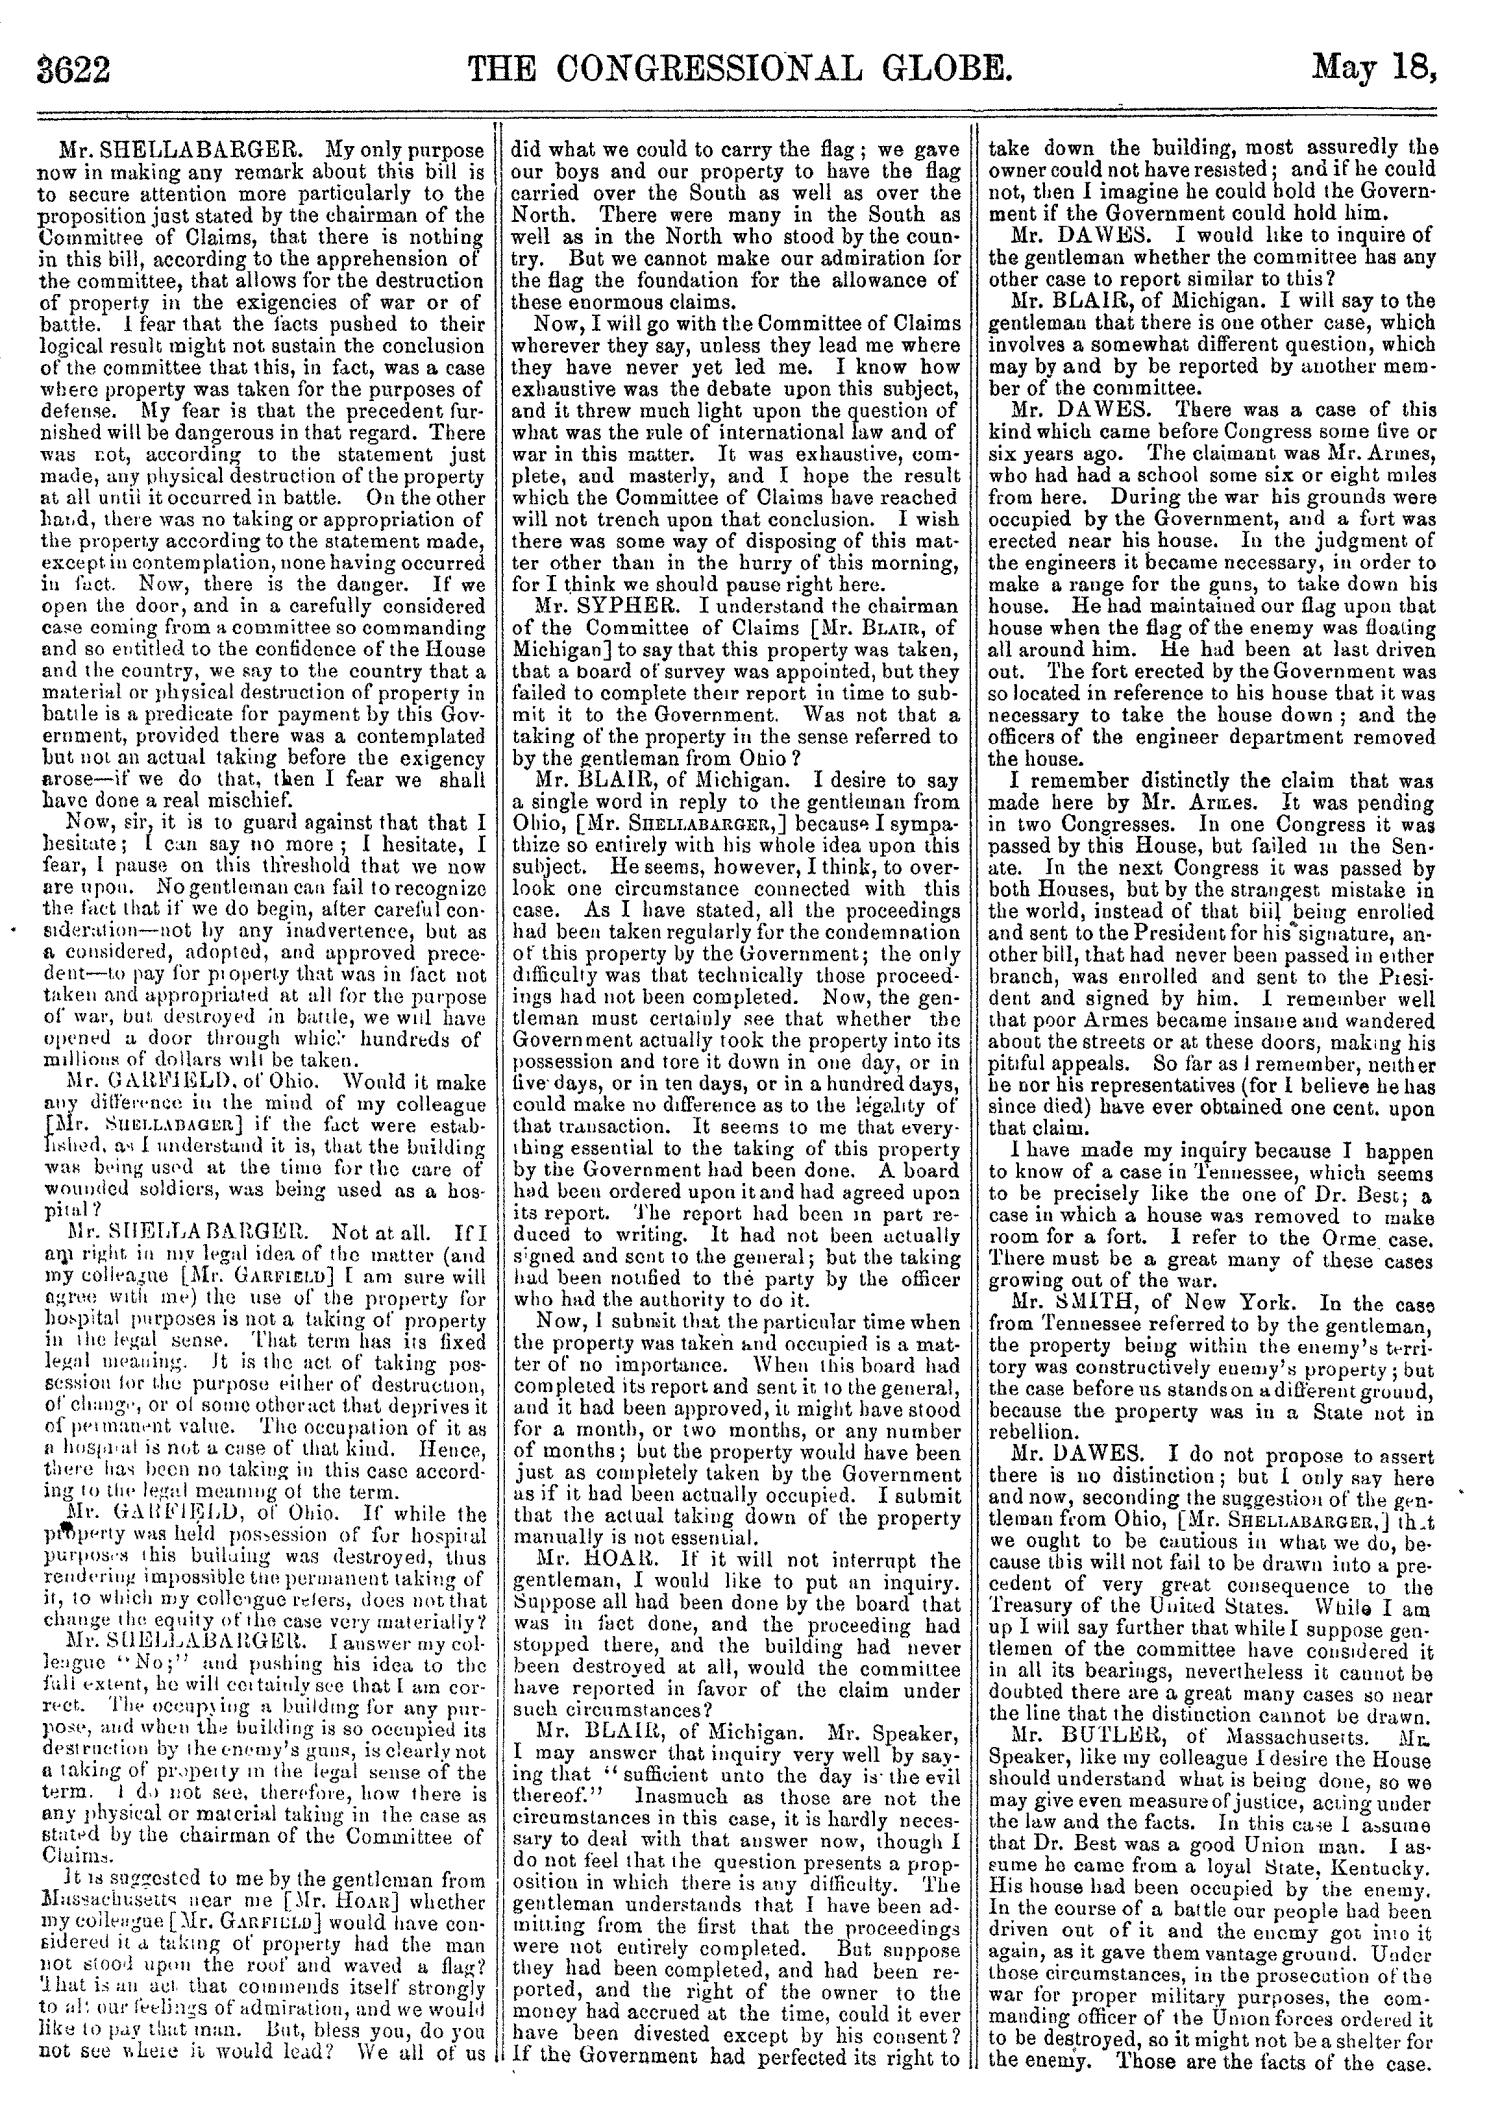 The Congressional Globe: Containing the Debates and Proceedings of the Second Session Forty-Second Congress; With an Appendix, Embracing the Laws Passed at that Session
                                                
                                                    3622
                                                